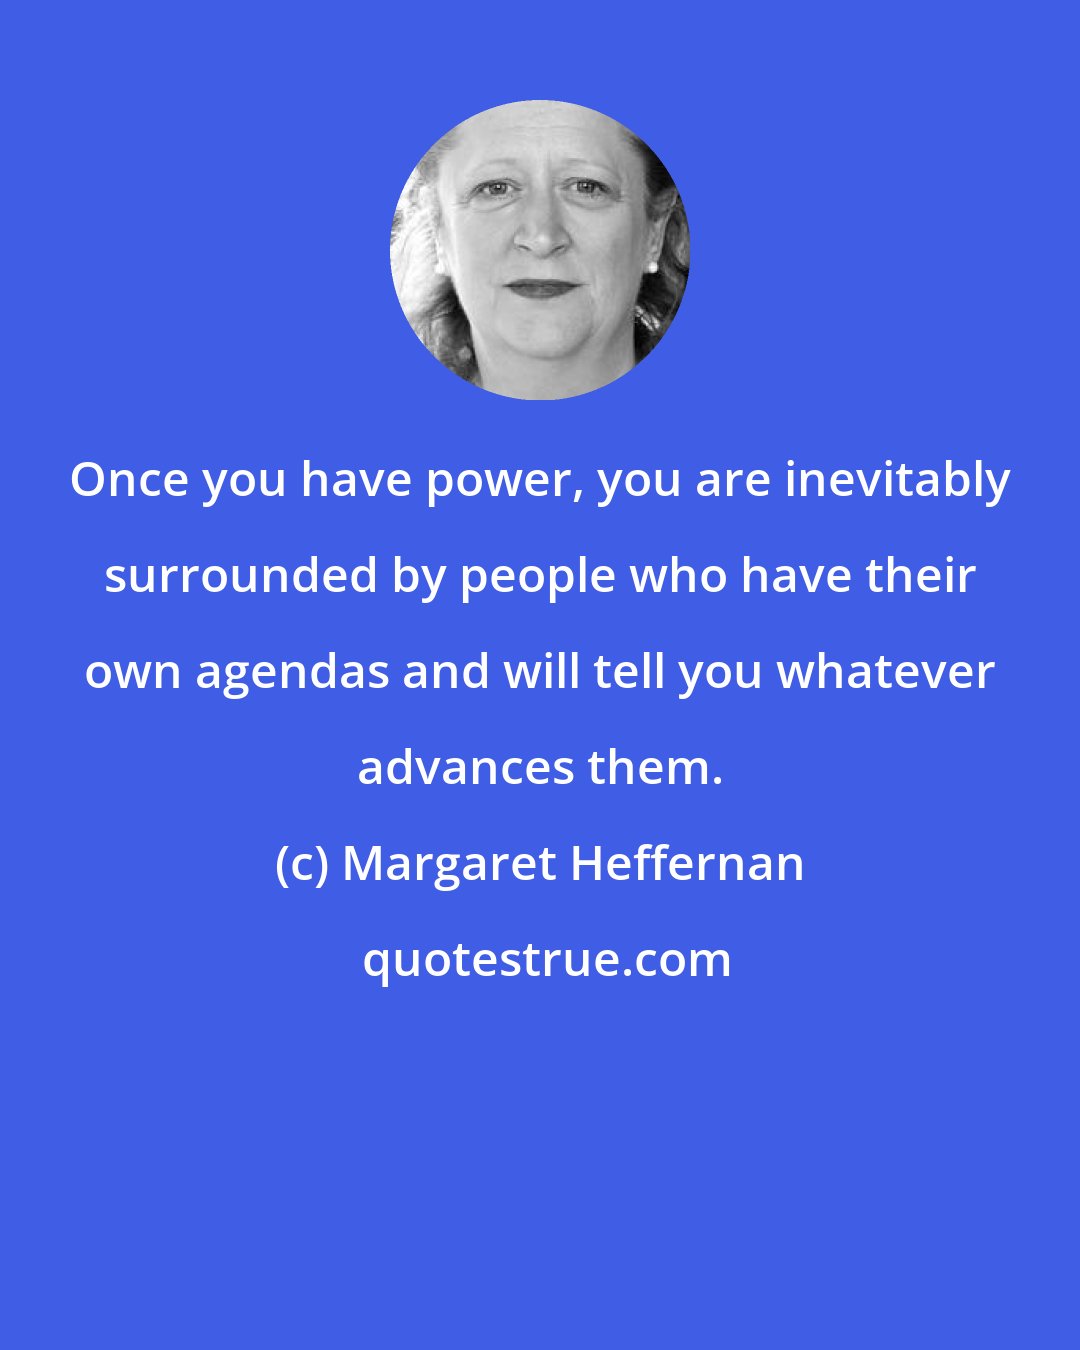 Margaret Heffernan: Once you have power, you are inevitably surrounded by people who have their own agendas and will tell you whatever advances them.